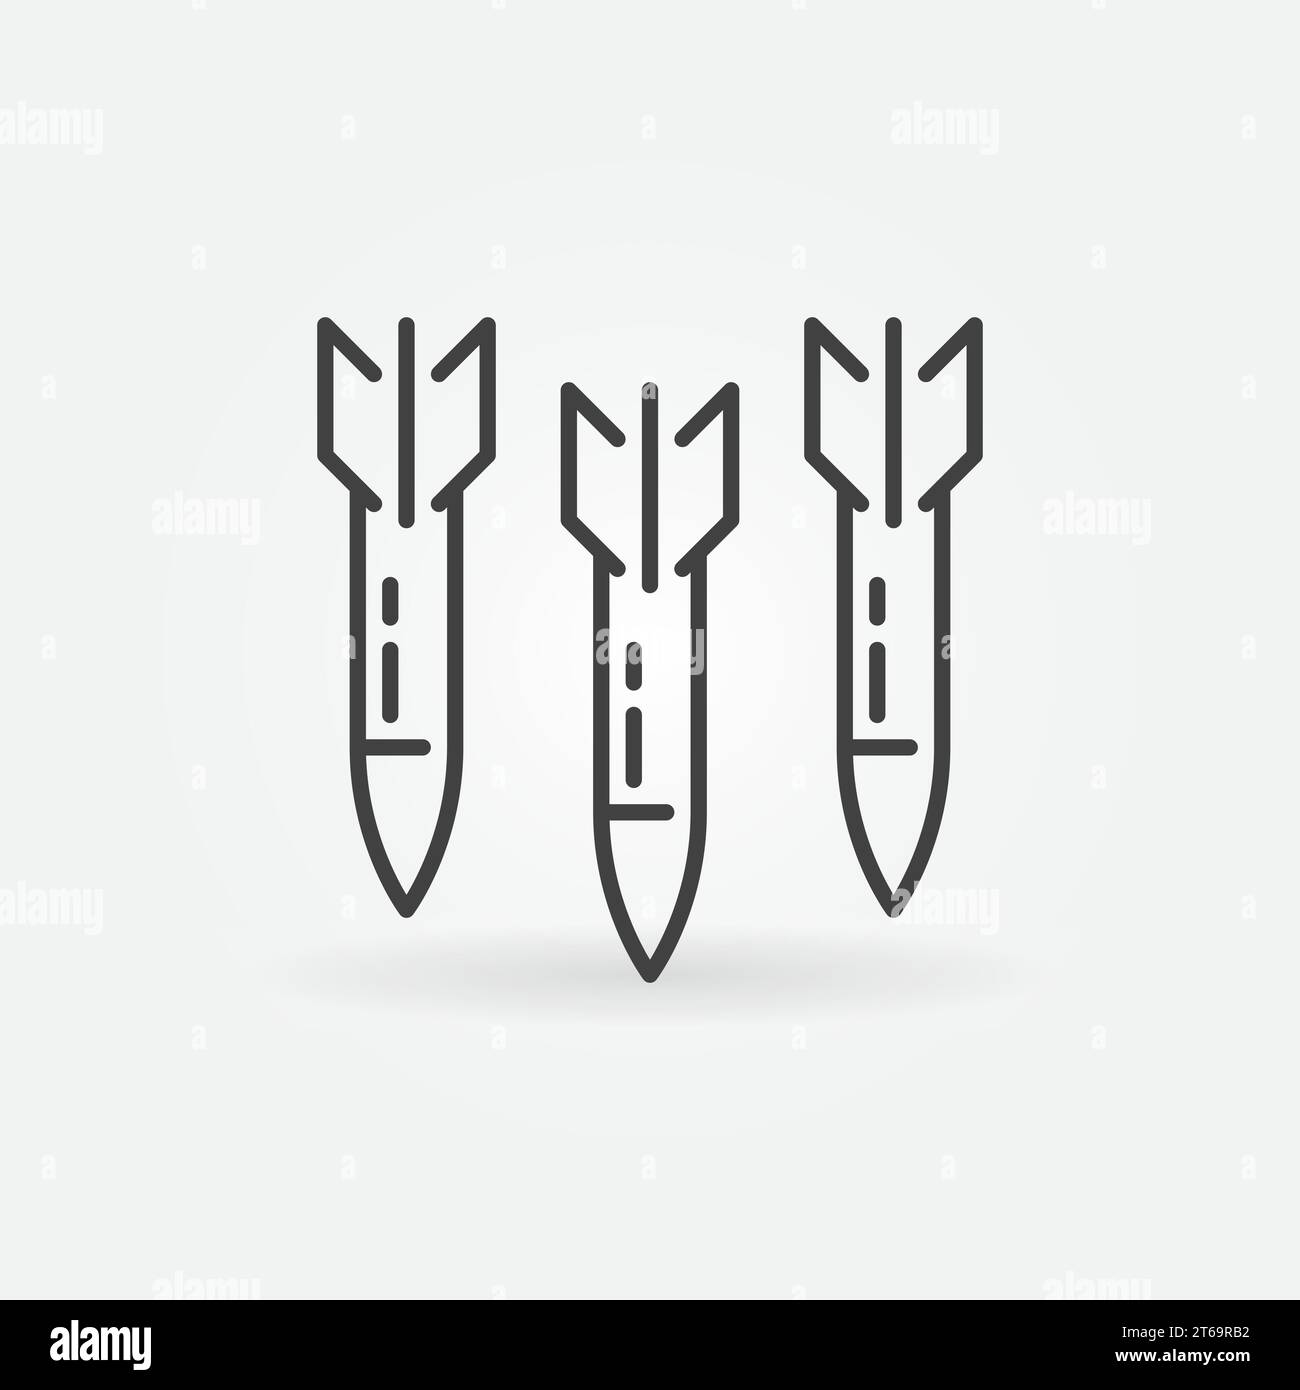 Three Missiles vector Air Strike concept outline icon or logo element Stock Vector